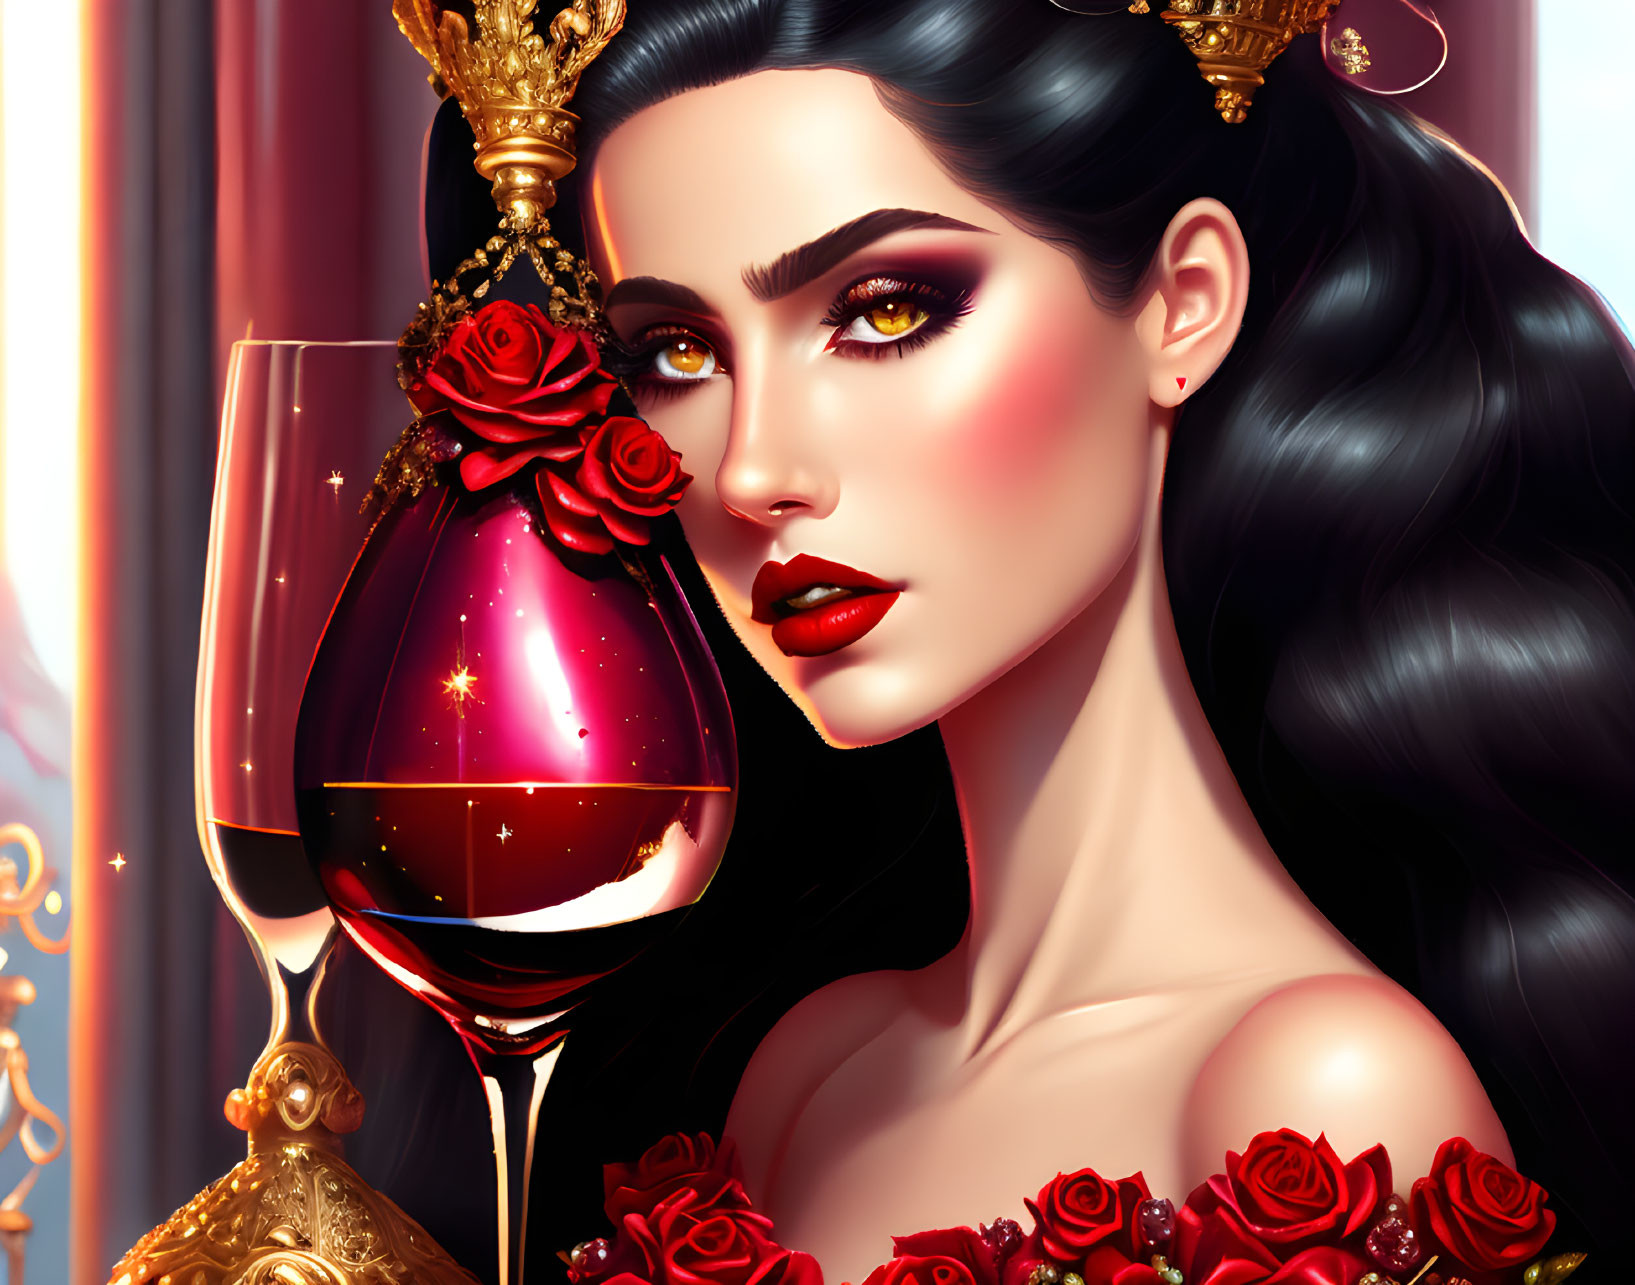 Dark-haired woman with red makeup holding a glass of wine surrounded by roses and gold accents.